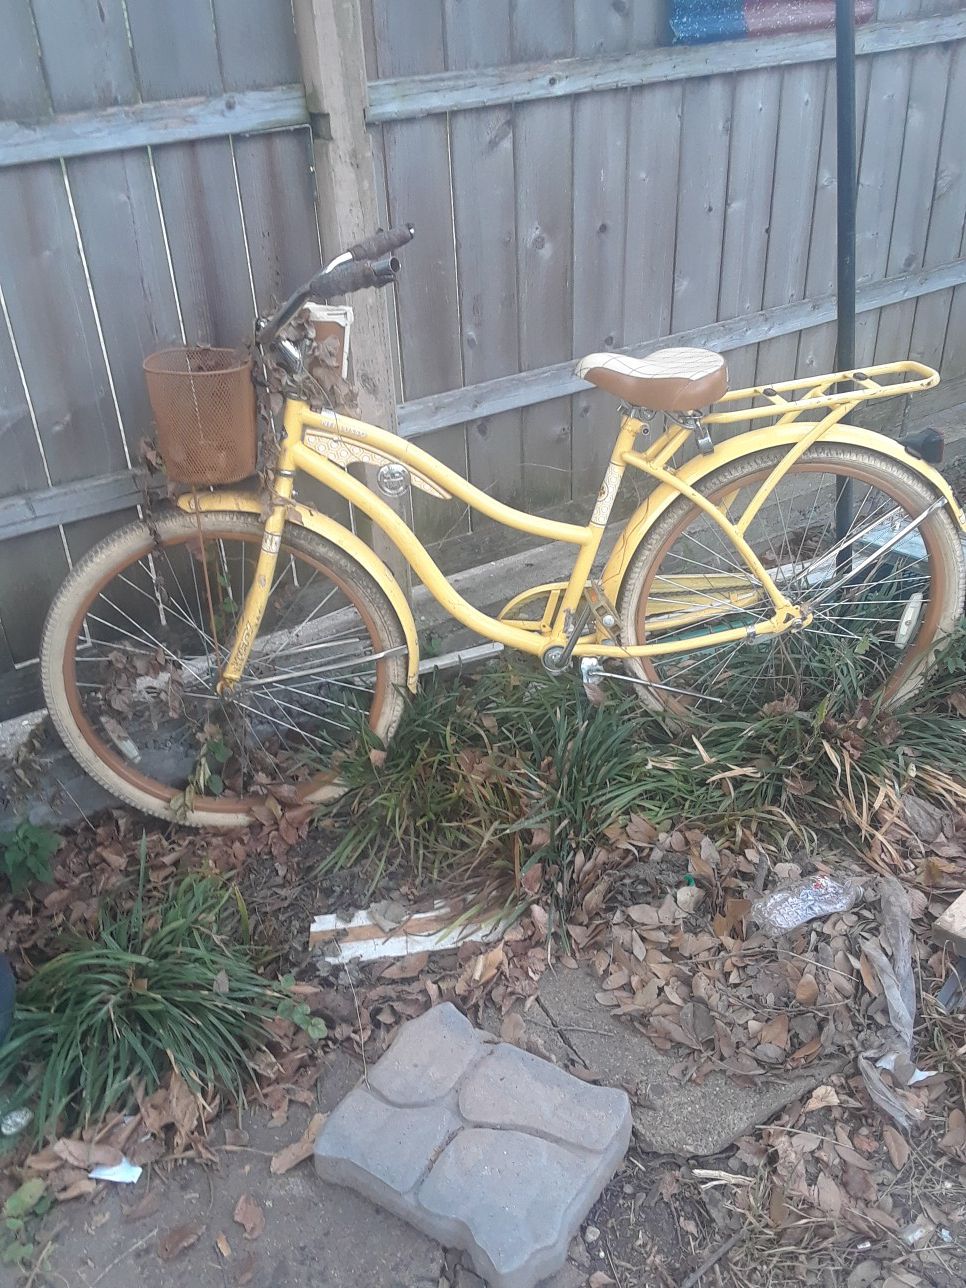 Yellow Bike Works great $75.00 cash only ((((NO HACKERS)))))